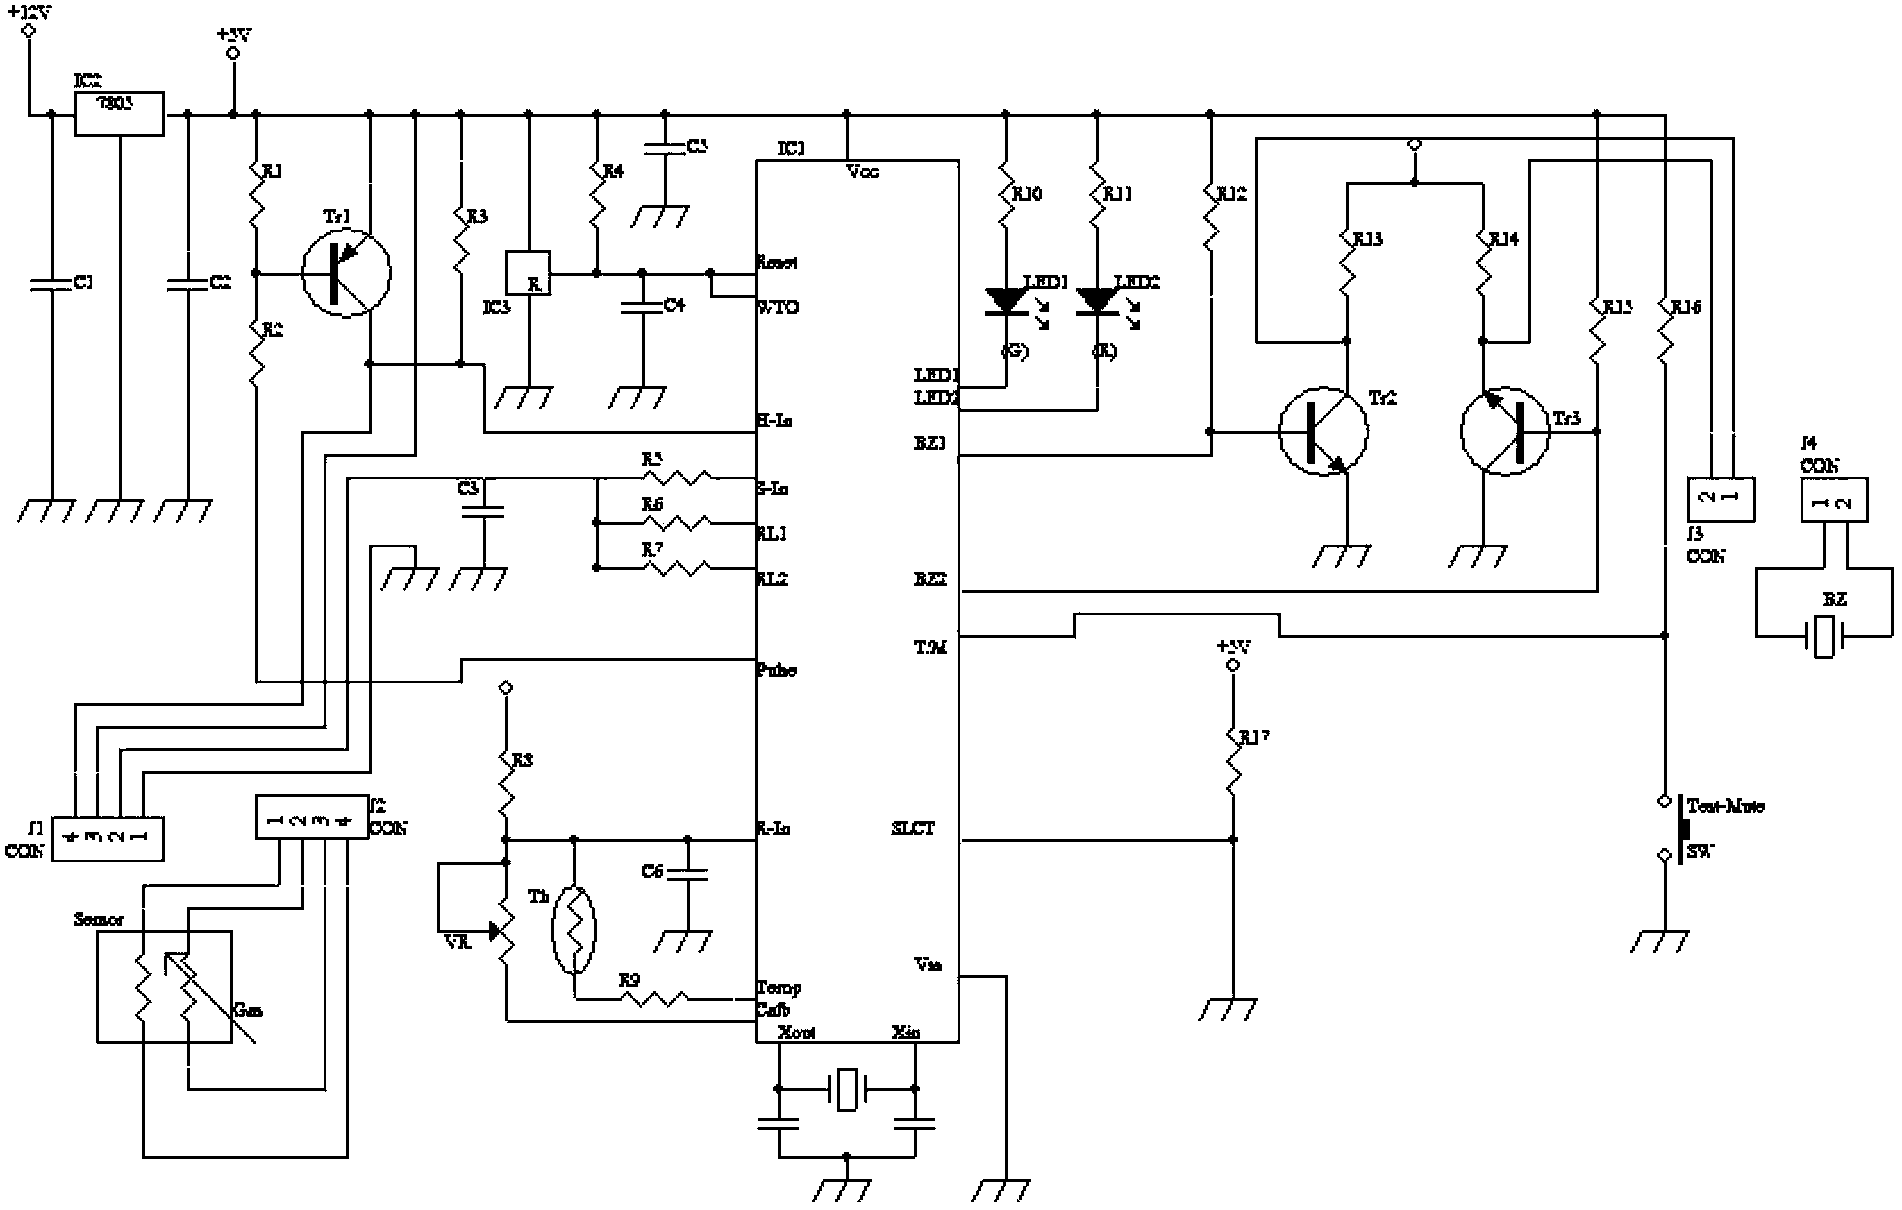 Refrigerator with CO detection alarming function